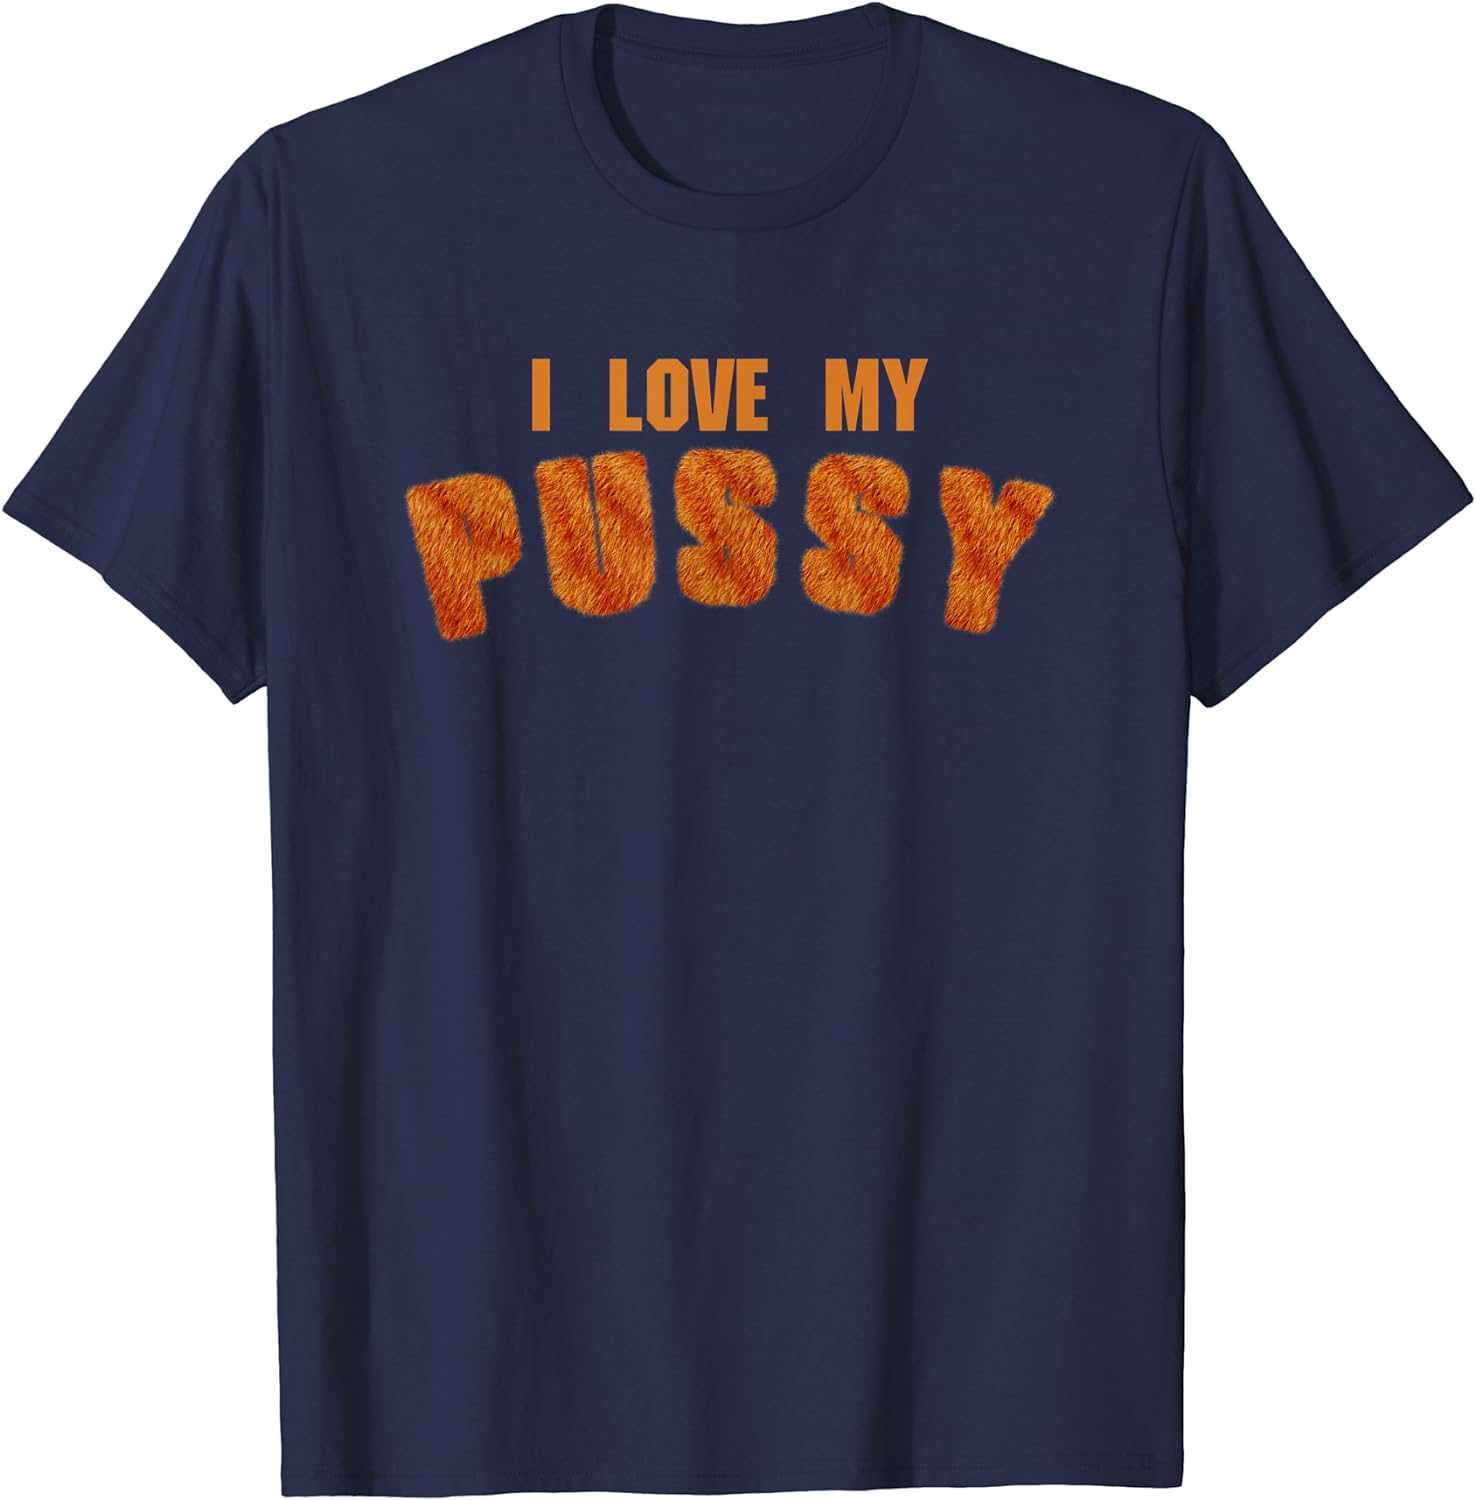 I love my PUSSY Cunnilingus Eat Pussy Cat Funny Meme Lesbian T-Shirt   price checker   price checker Description Gallery